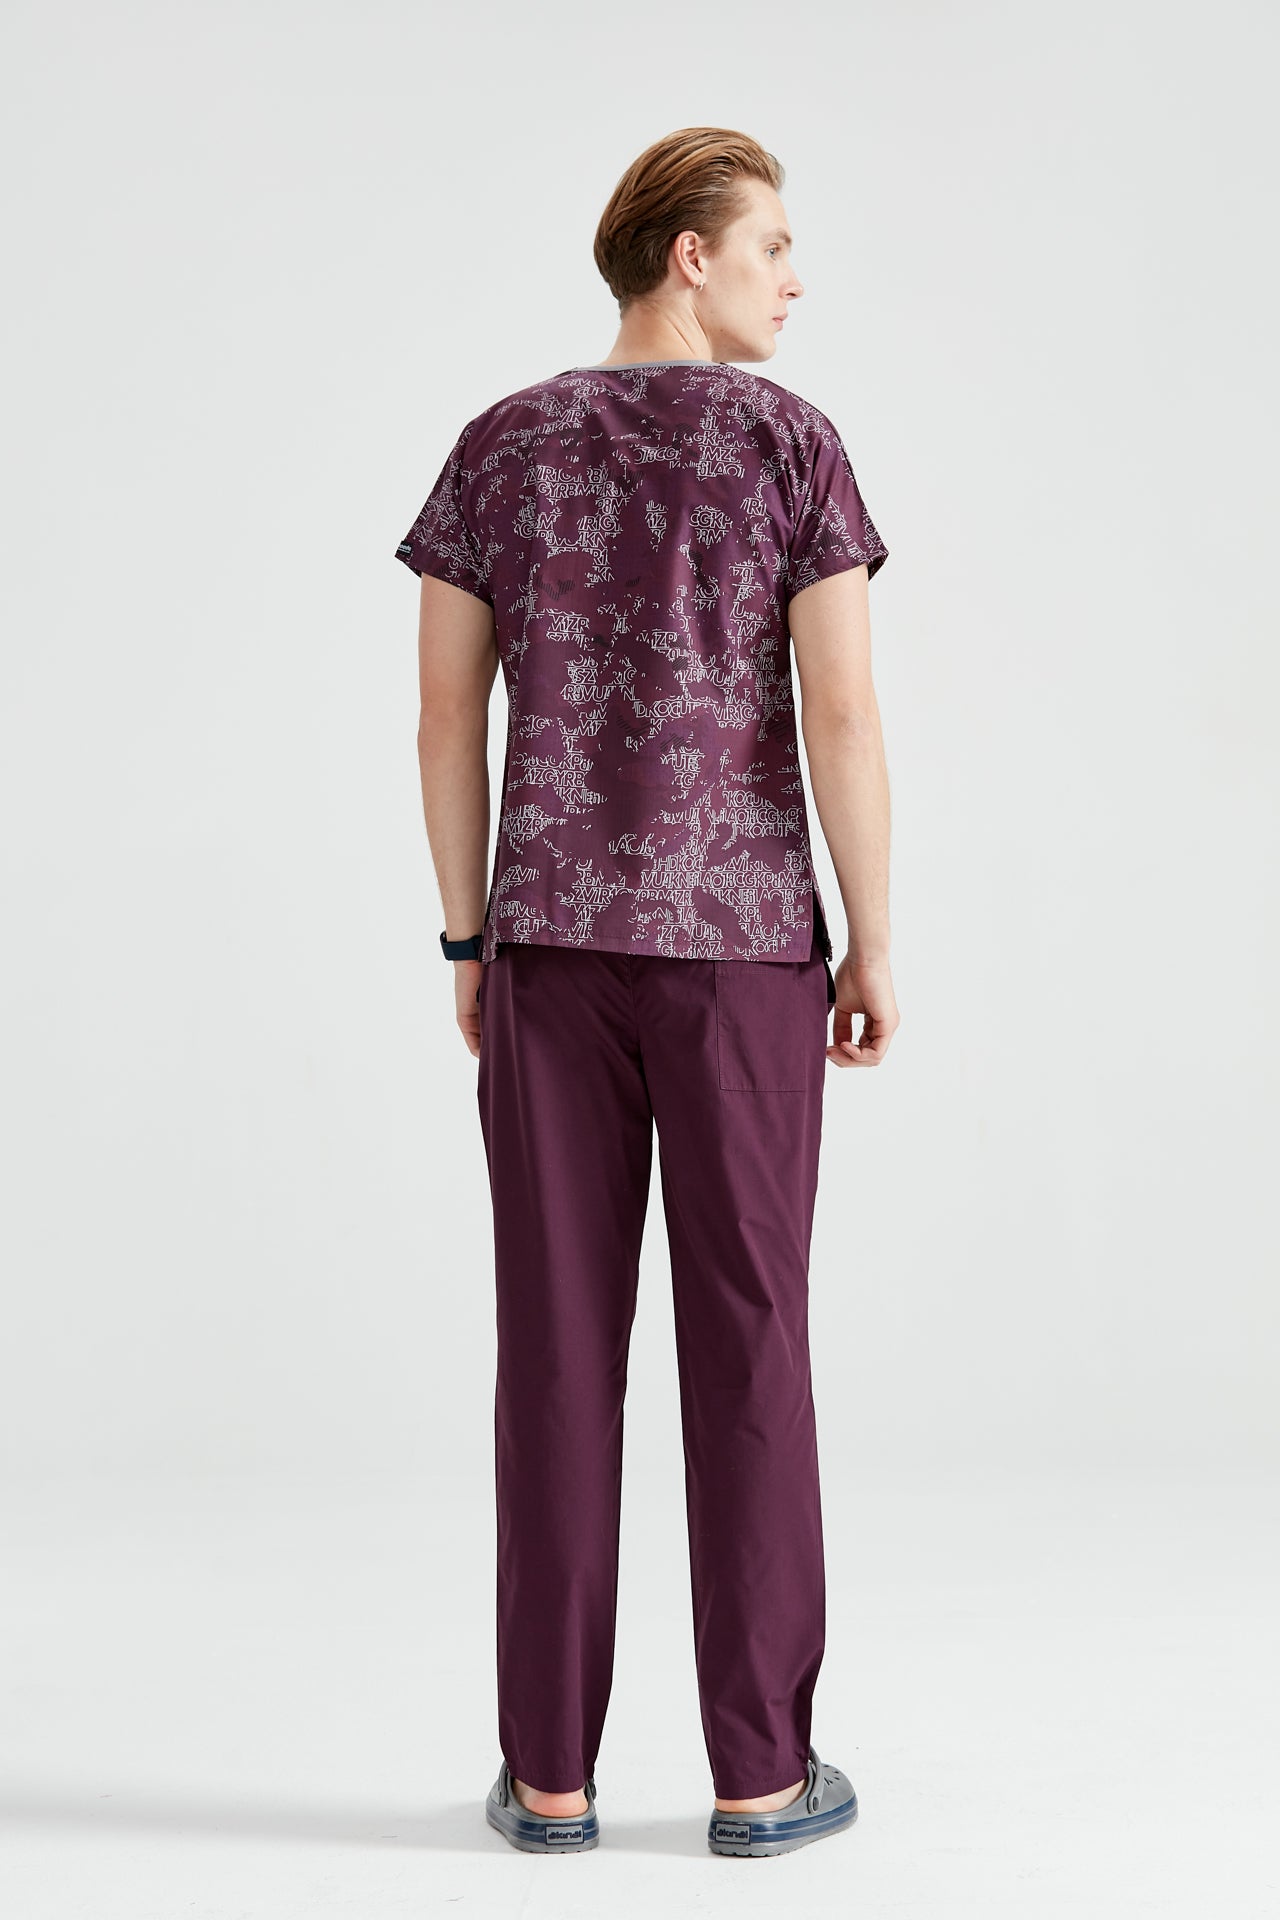 Asistent medical imbracat in bluza Camouflage Purple, vedere din spate